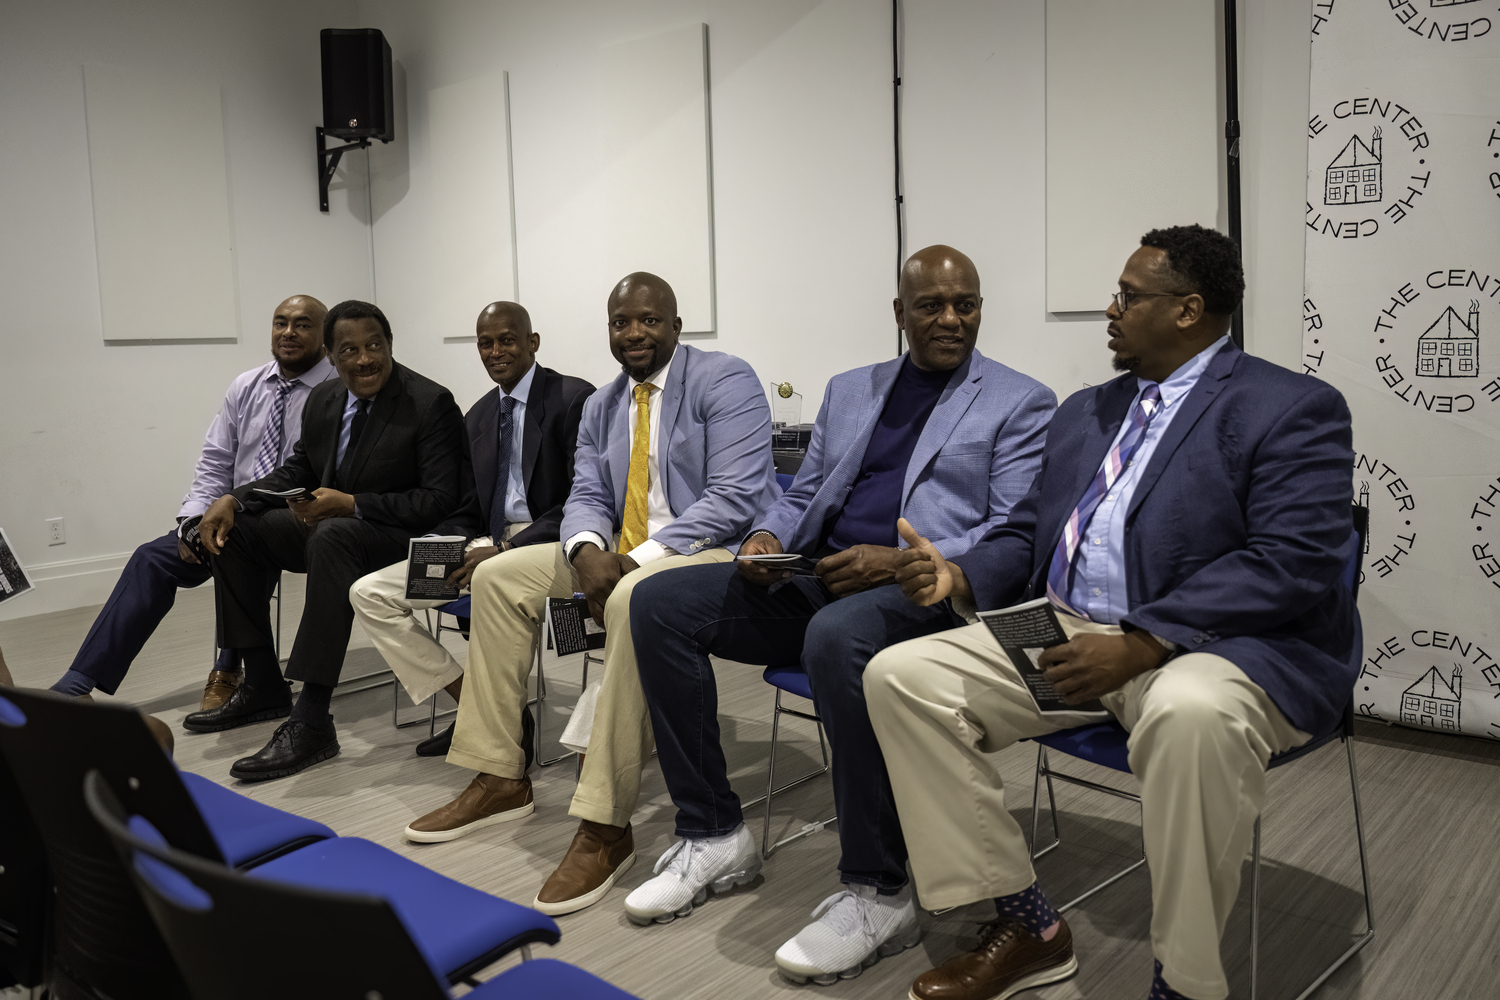 The Bridgehampton Child Care and Recreational Center honored seven Black basketball coaches from the East End. They included, from left, Nick Thomas, Richard “Juni” Wingfield, Carl Johnson, Ron White, Herm Lamison, Ron Gholson, and not in attendance but still honored was Howard Wood.    MARIANNE BARNETT